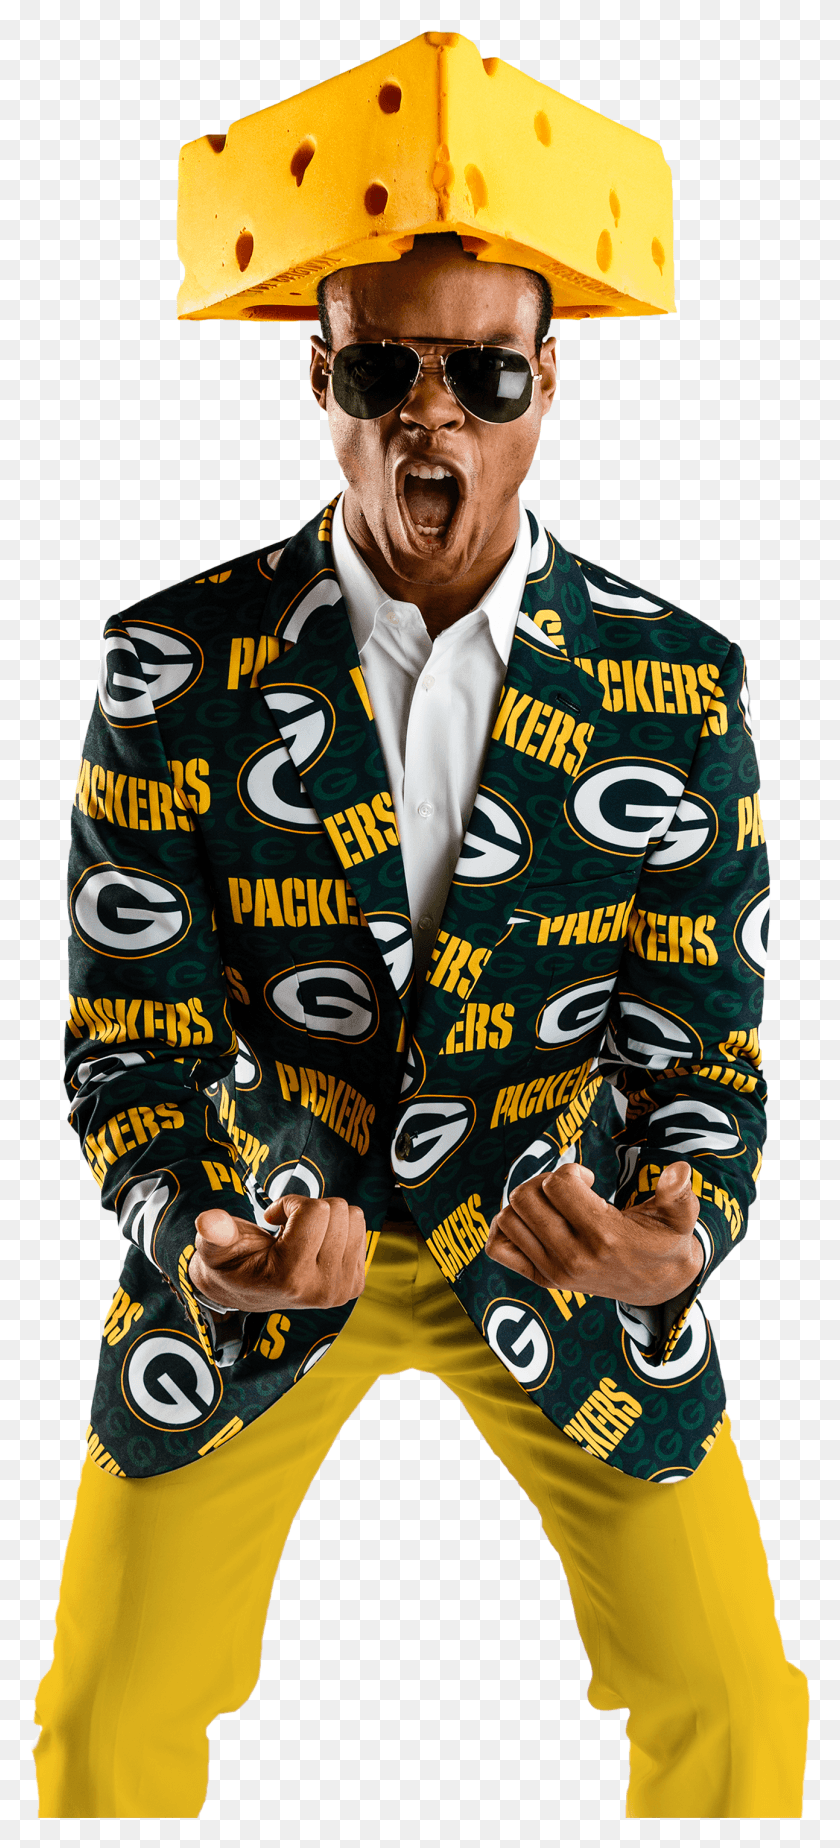 1293x2965 Packers V1538078793 Green Bay Packers Blazers, Одежда, Одежда, Рукав Png Скачать